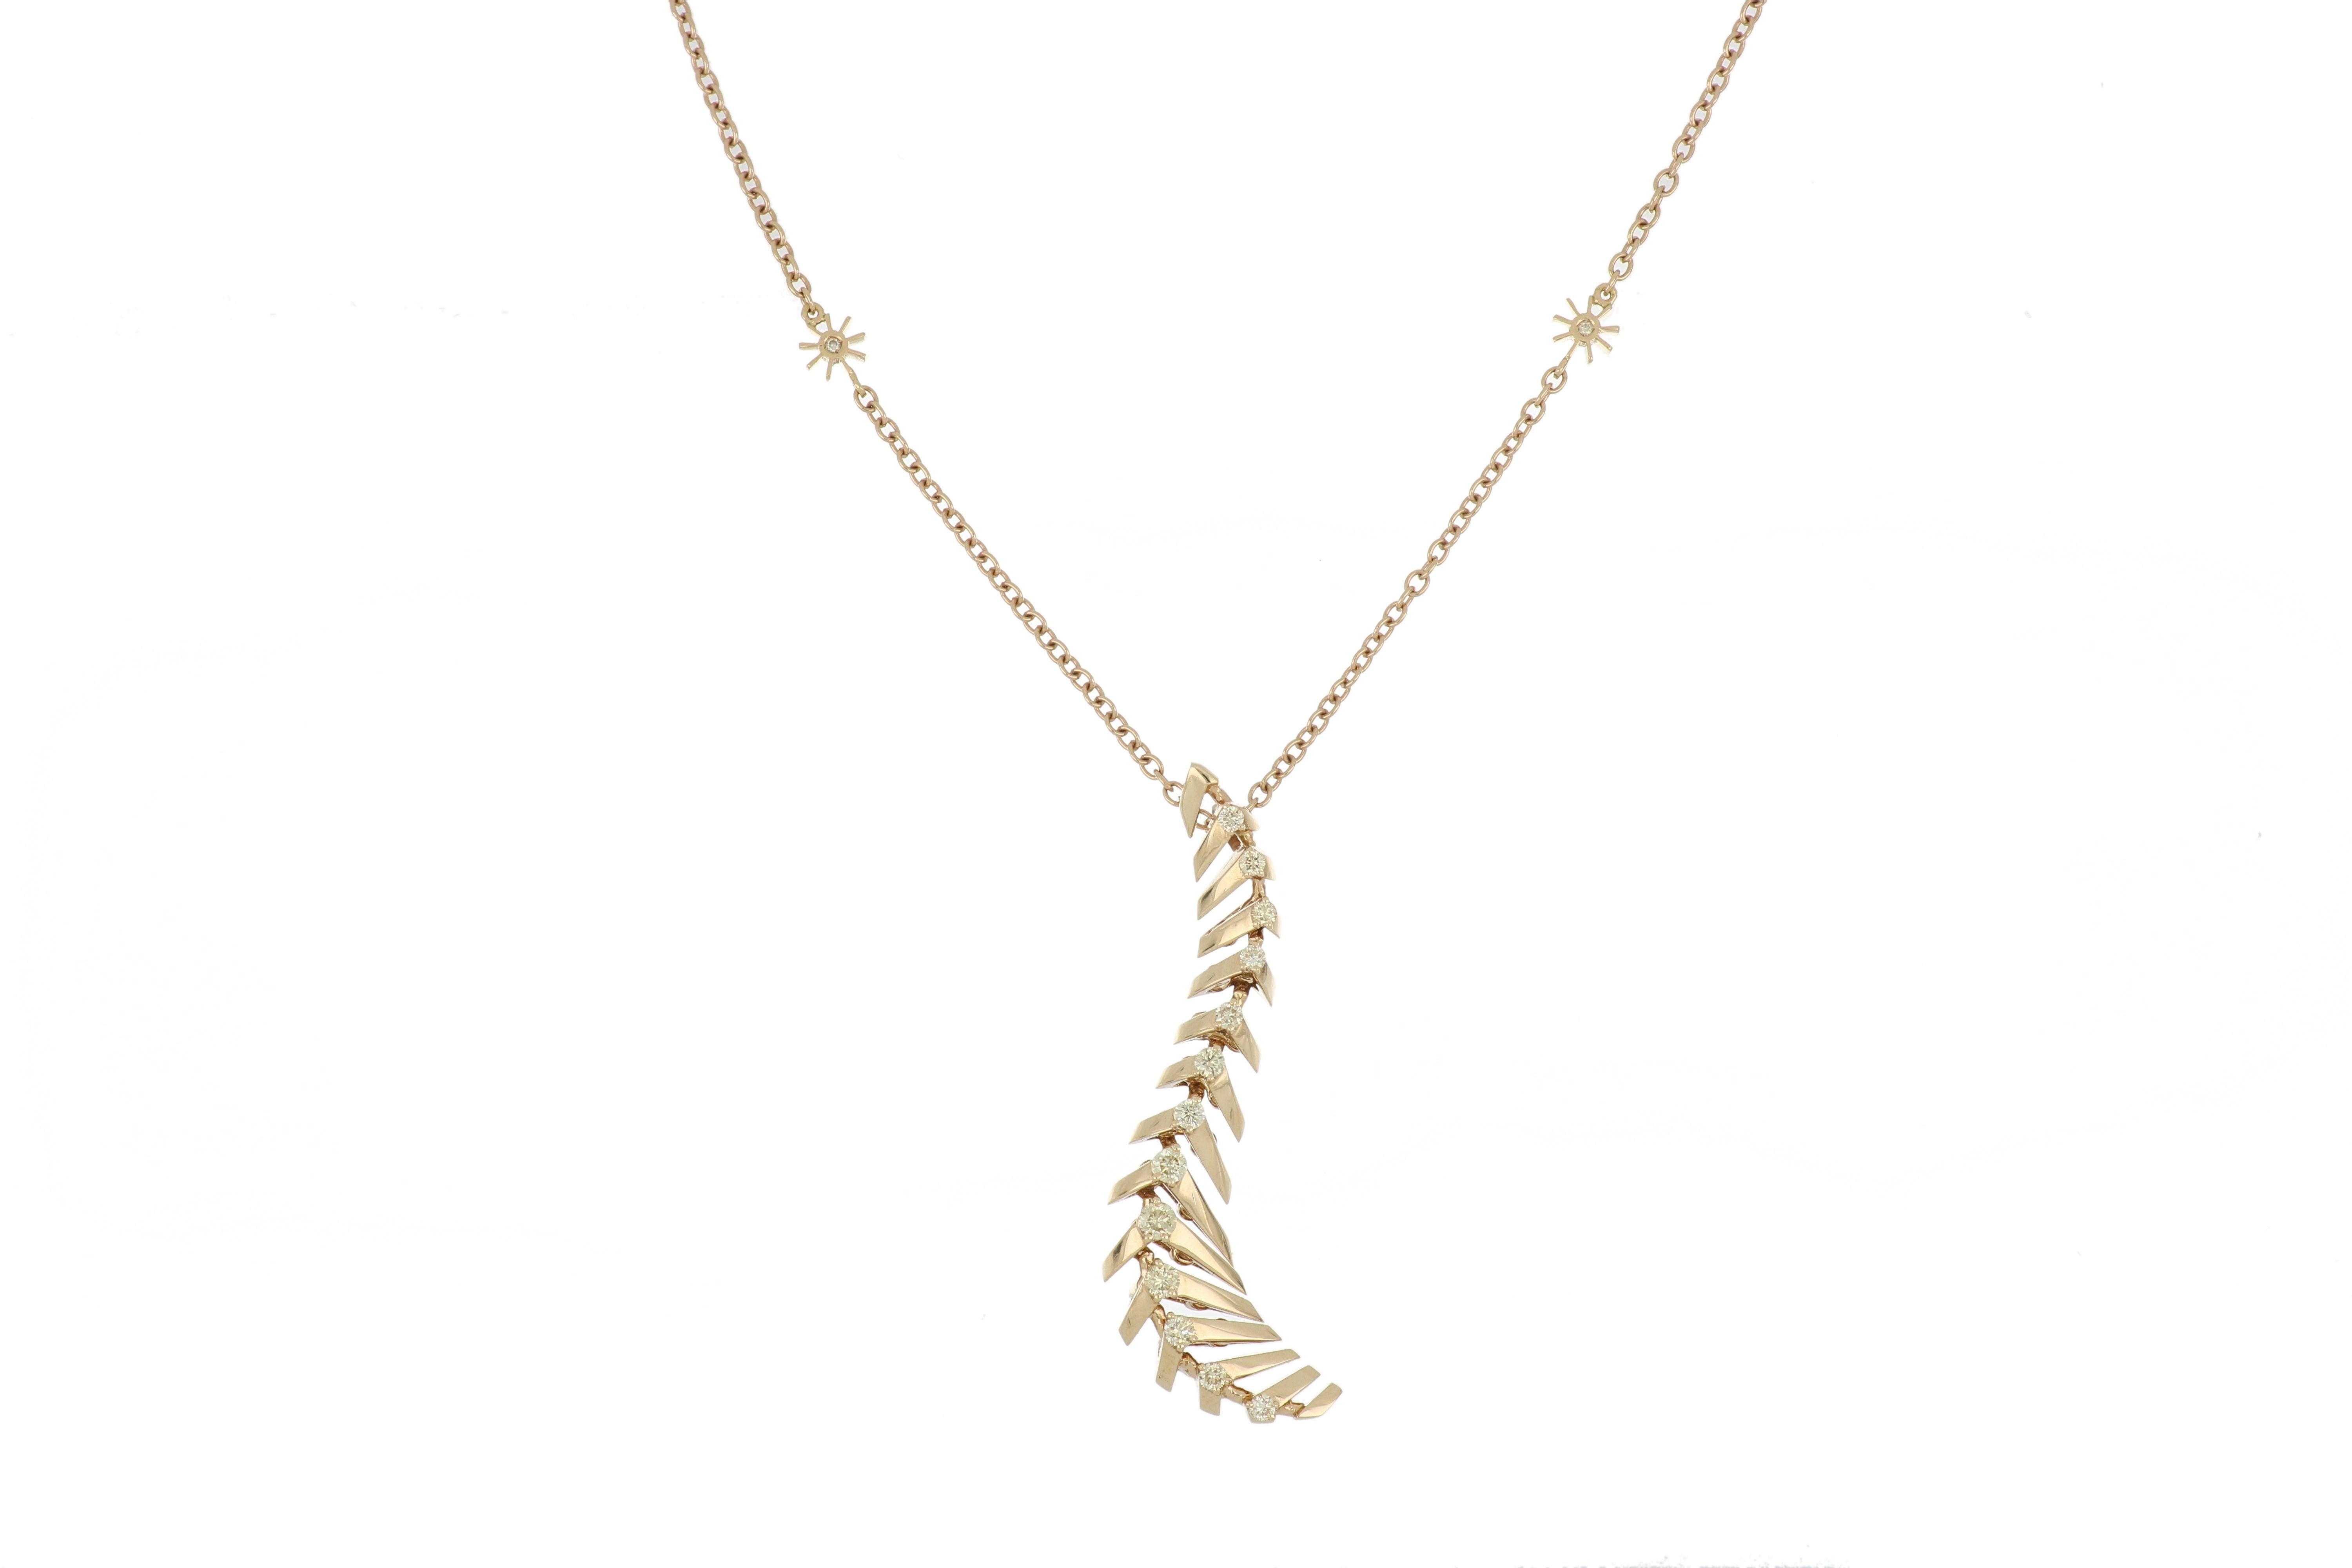 This gorgeous, feminine pendant in the Soffio collection was inspired by the gentle curves seen in dandelions. 18k rose gold, this posh pendant has a soft curve that is adorned elegantly with cream diamonds and sapphires. This pendant would look